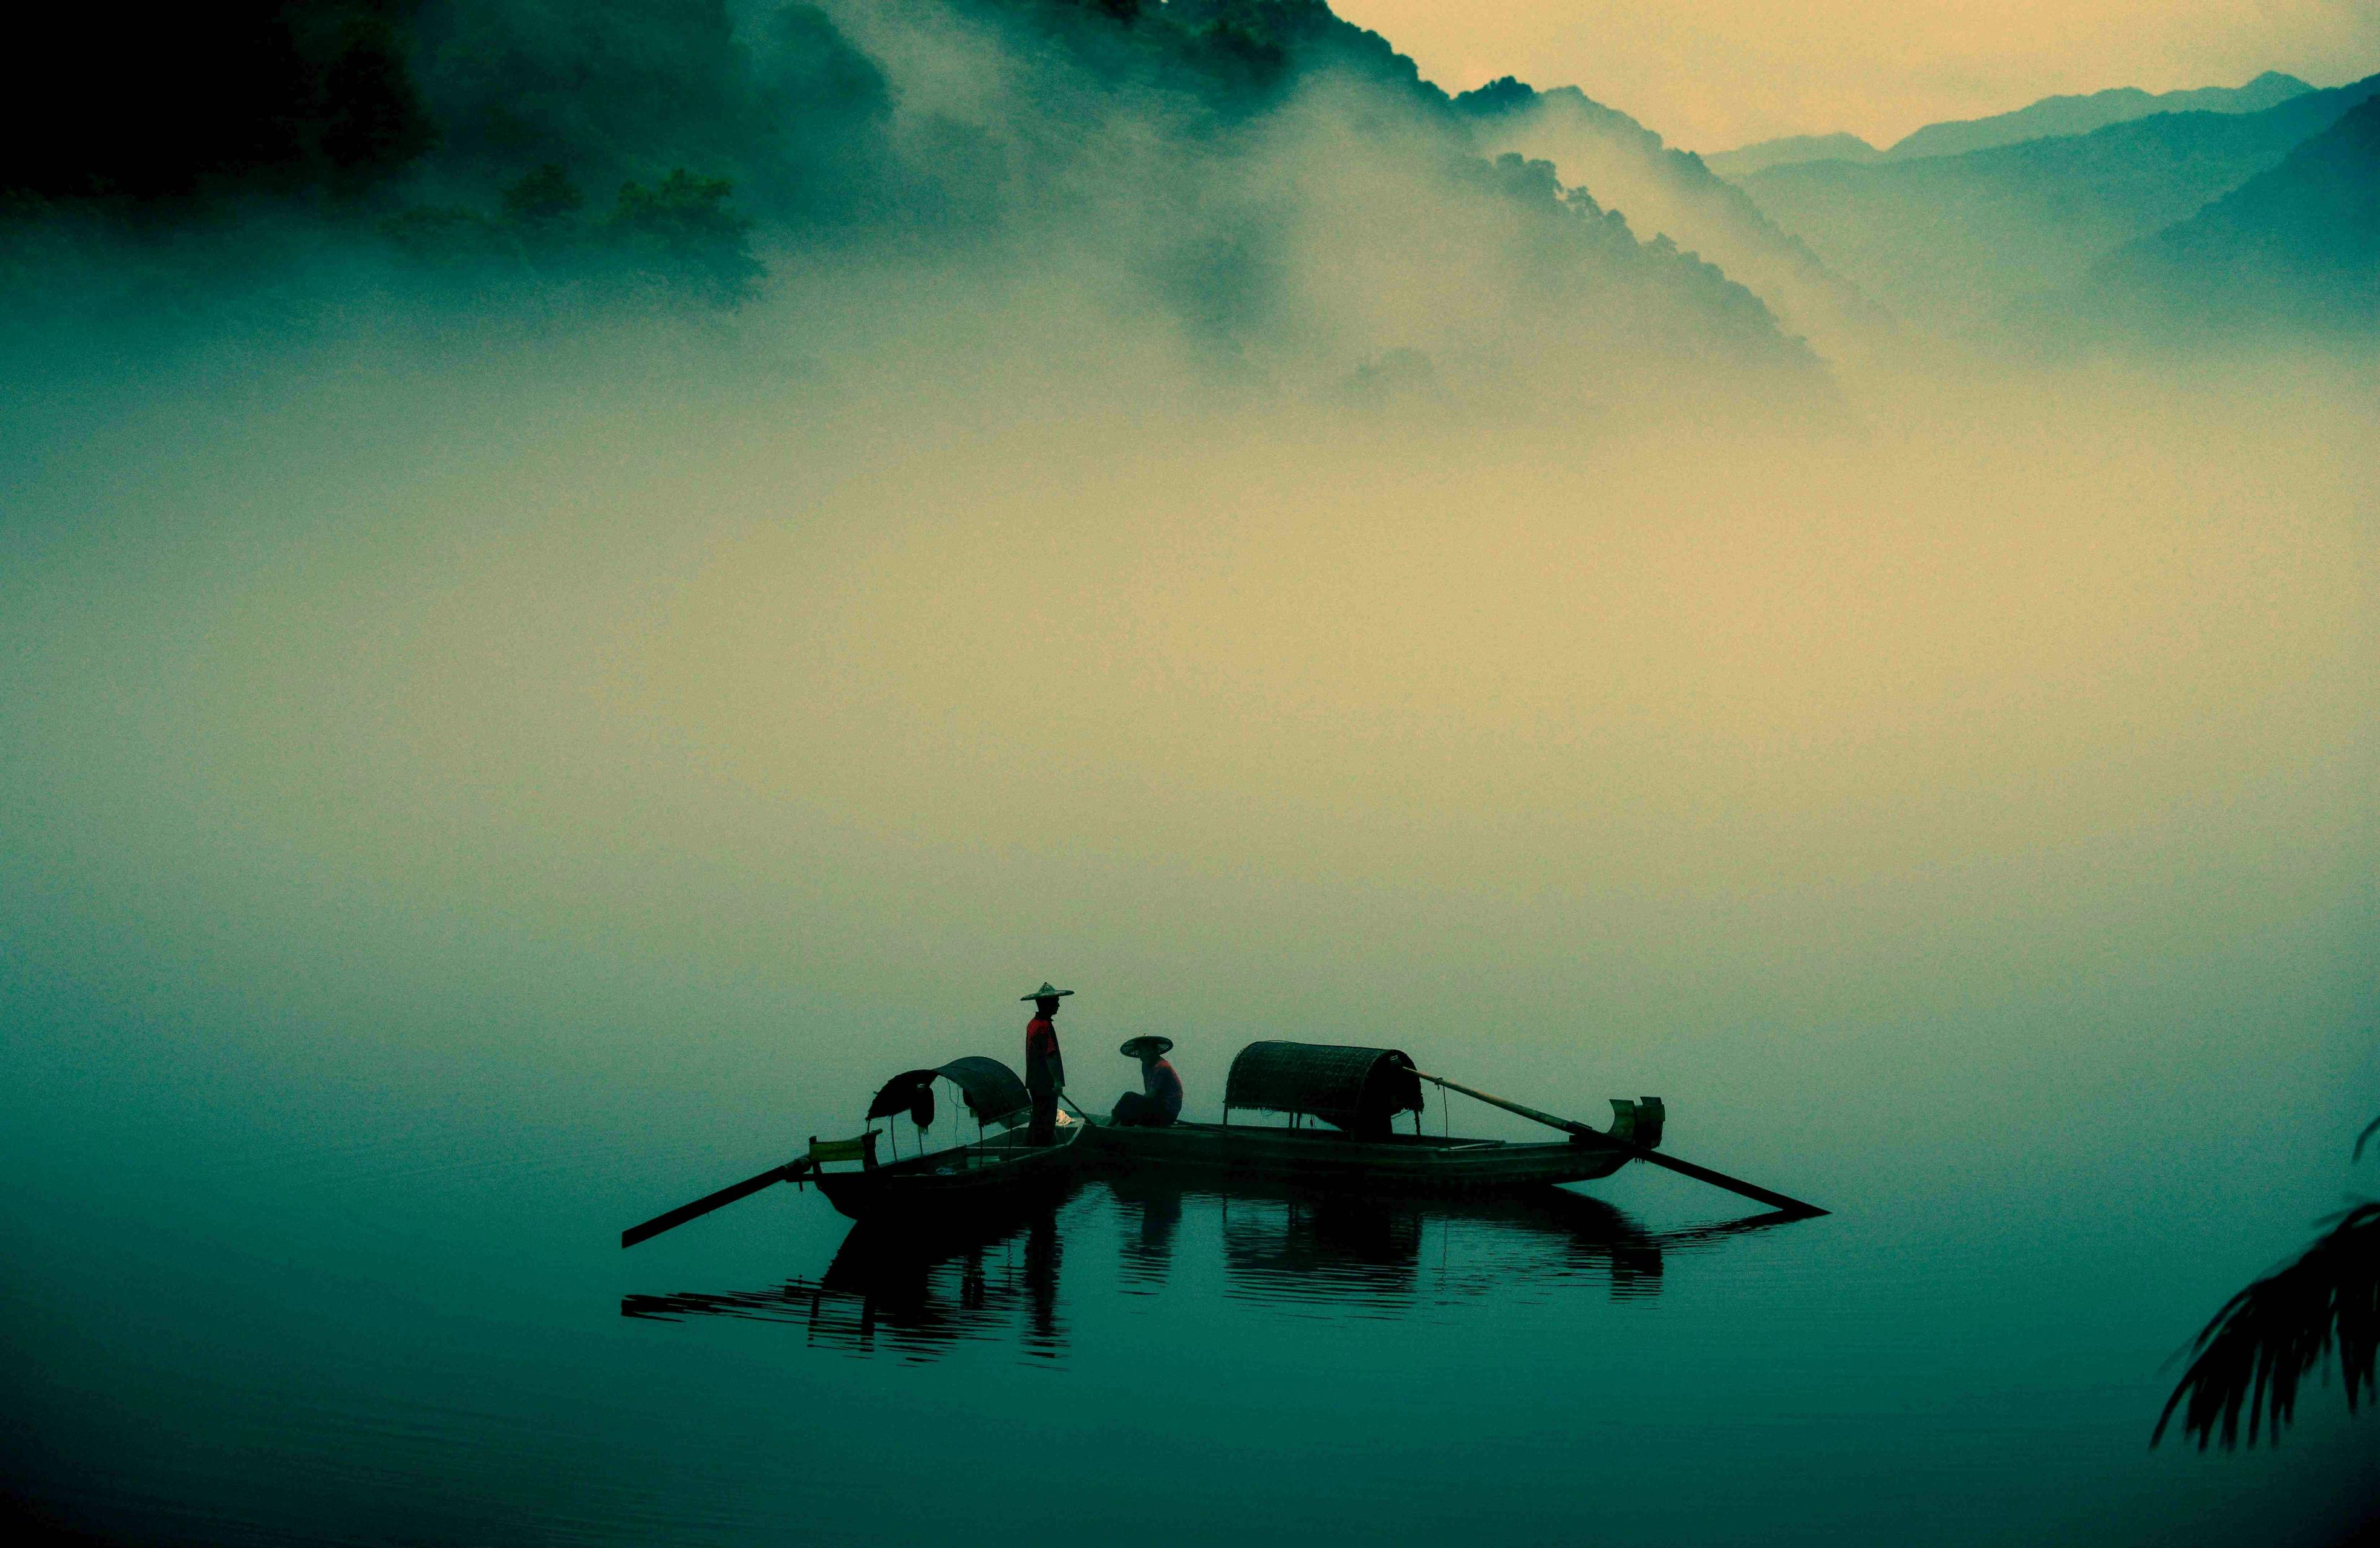 Men fishing on a misty lake in China